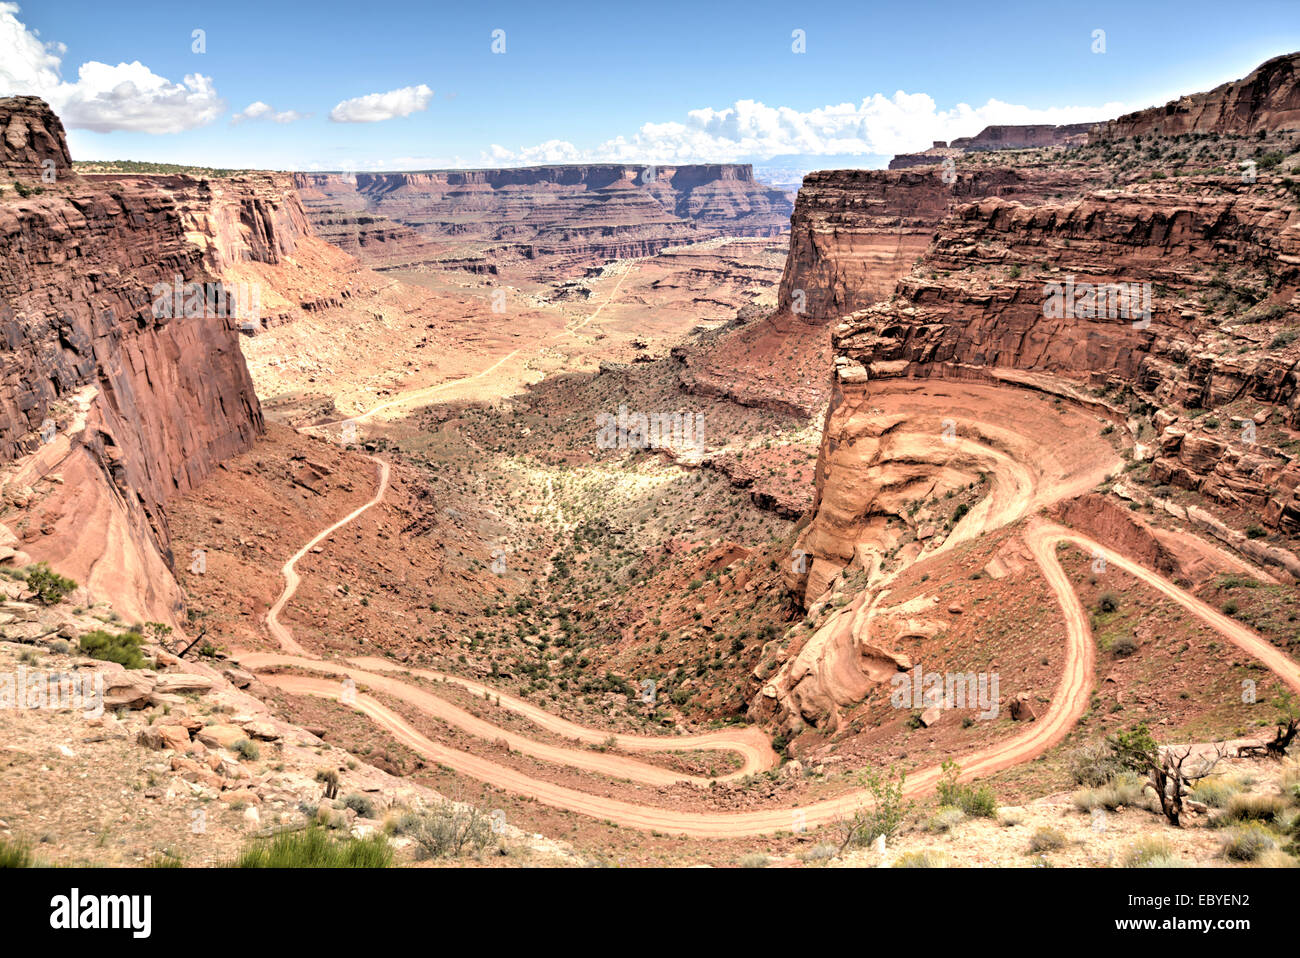 USA, Utah, Canyonlands National Park, Island in the Sky, Schafer Trail Road Stockfoto